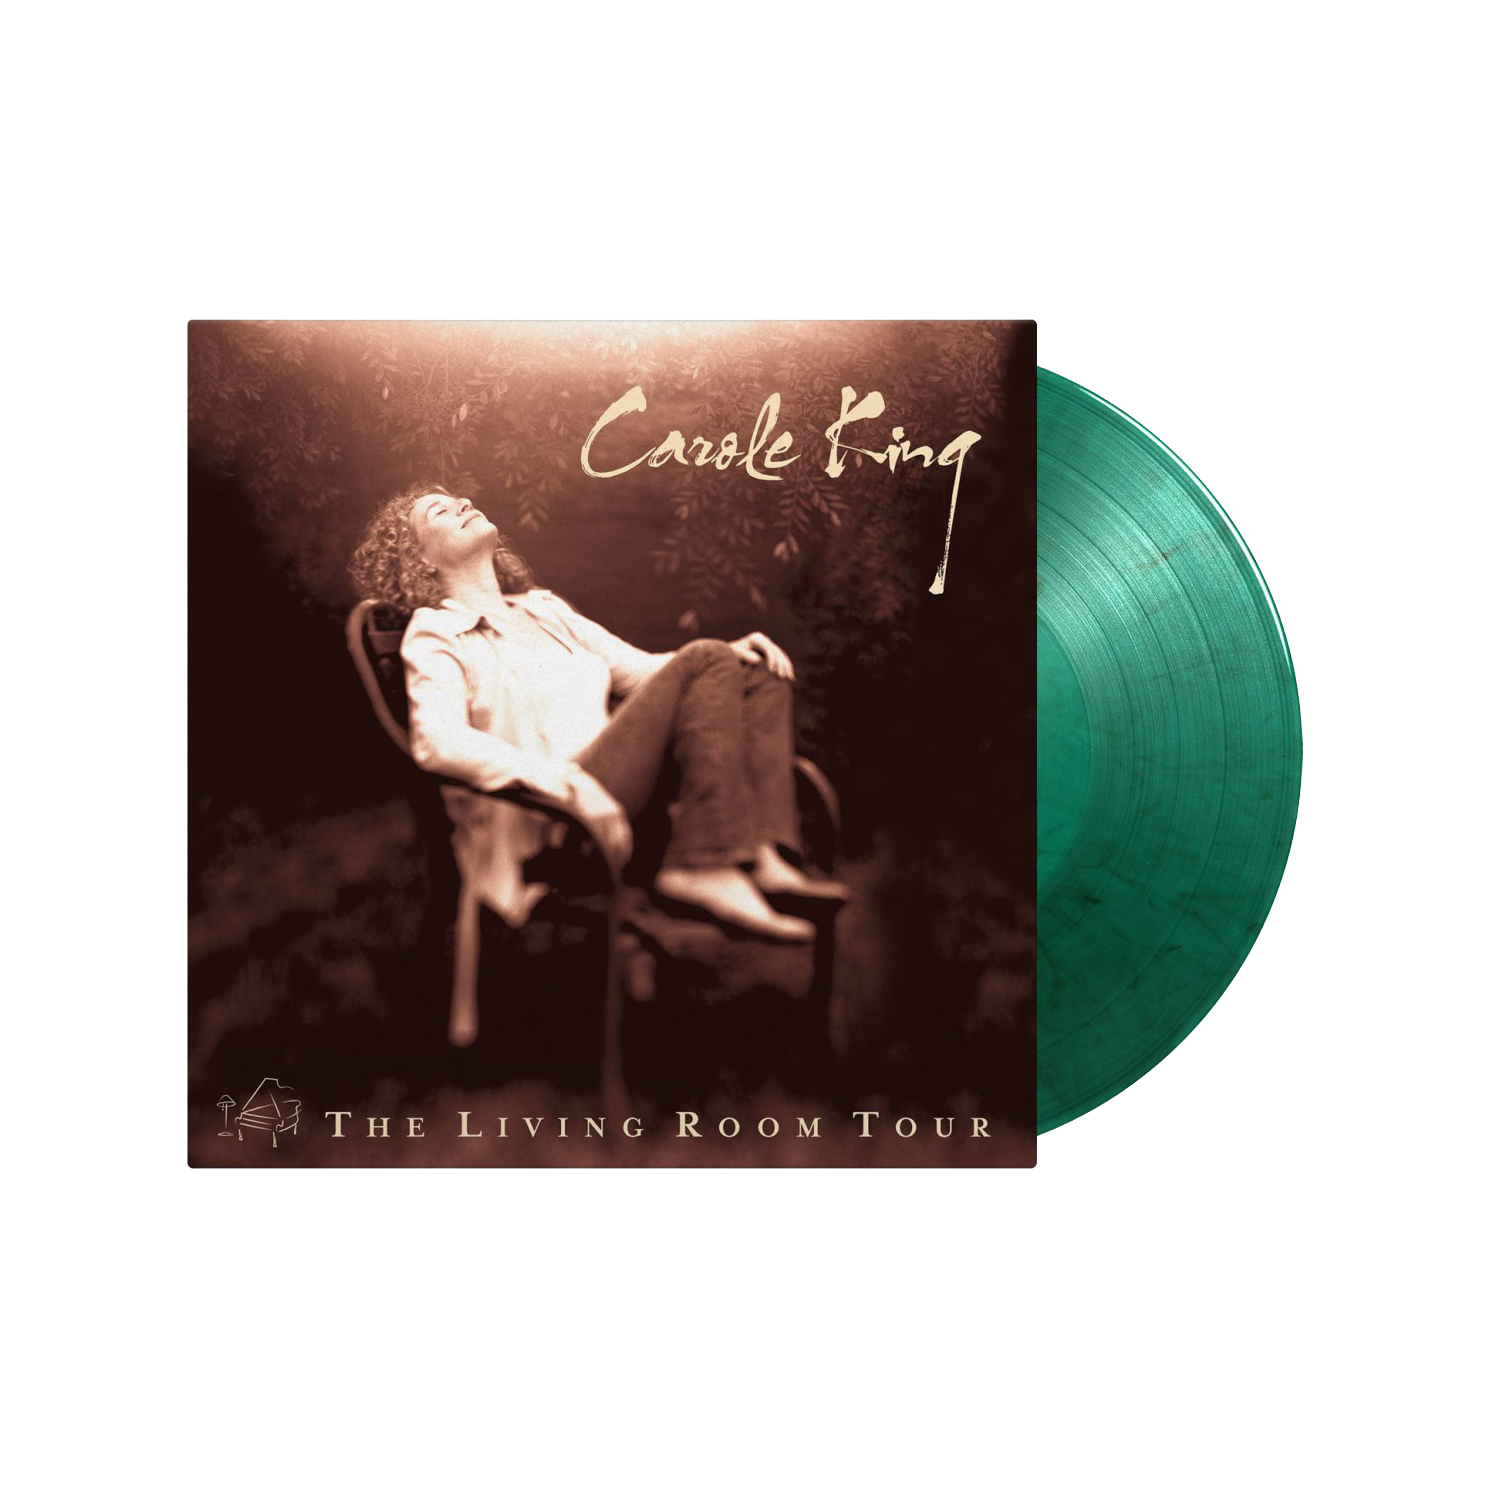 Carole King - The Living Room Tour: Limited Green Marbled Vinyl 2LP